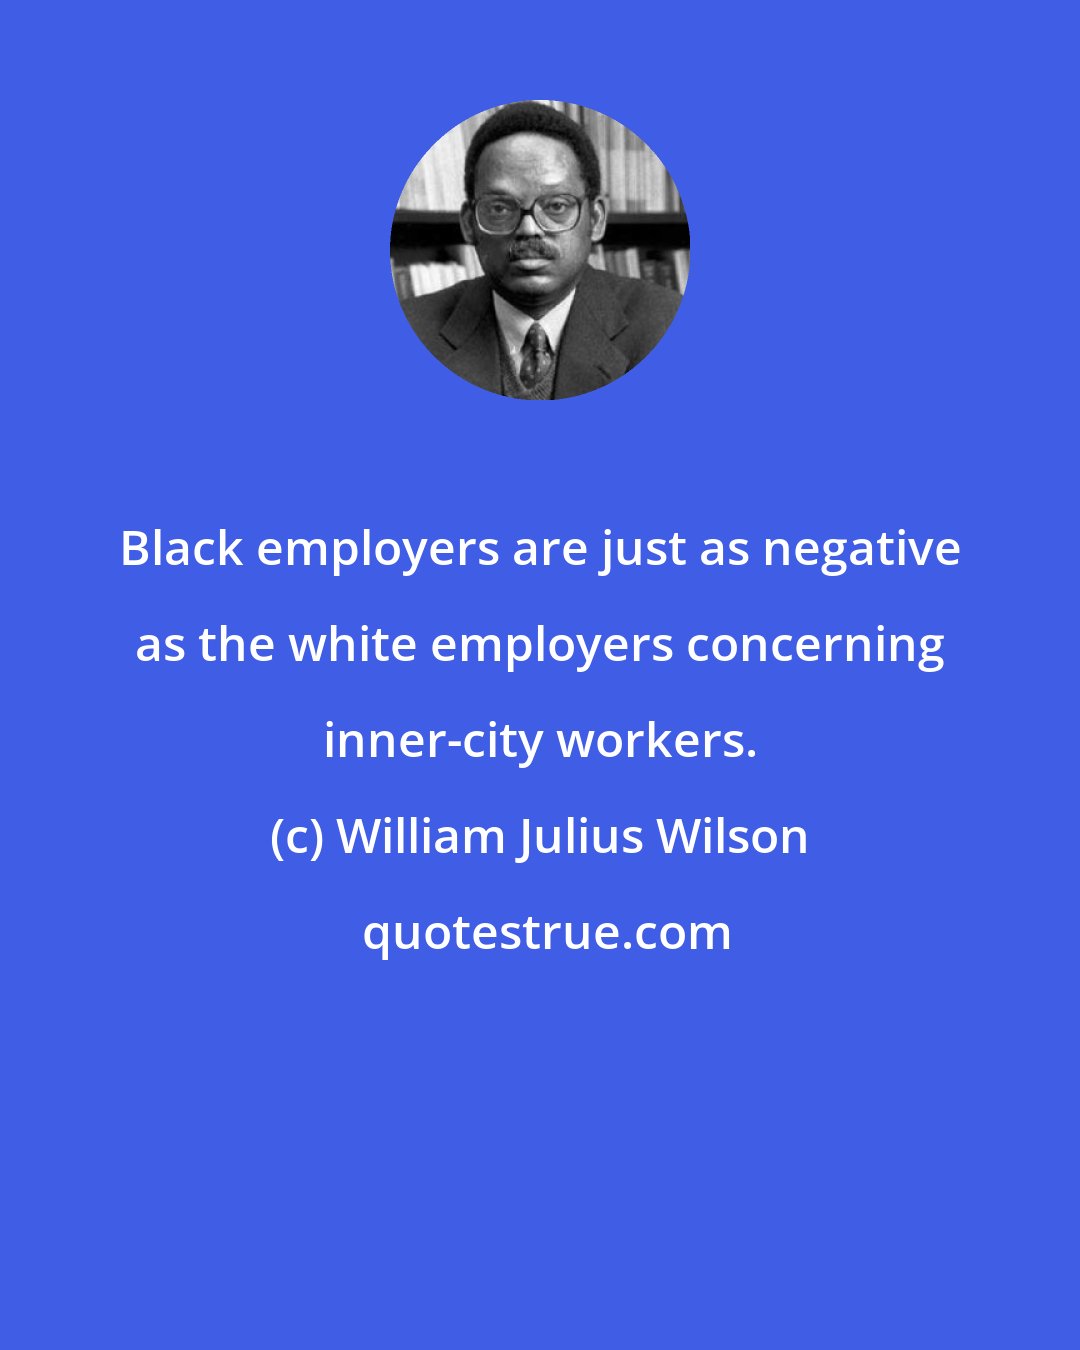 William Julius Wilson: Black employers are just as negative as the white employers concerning inner-city workers.